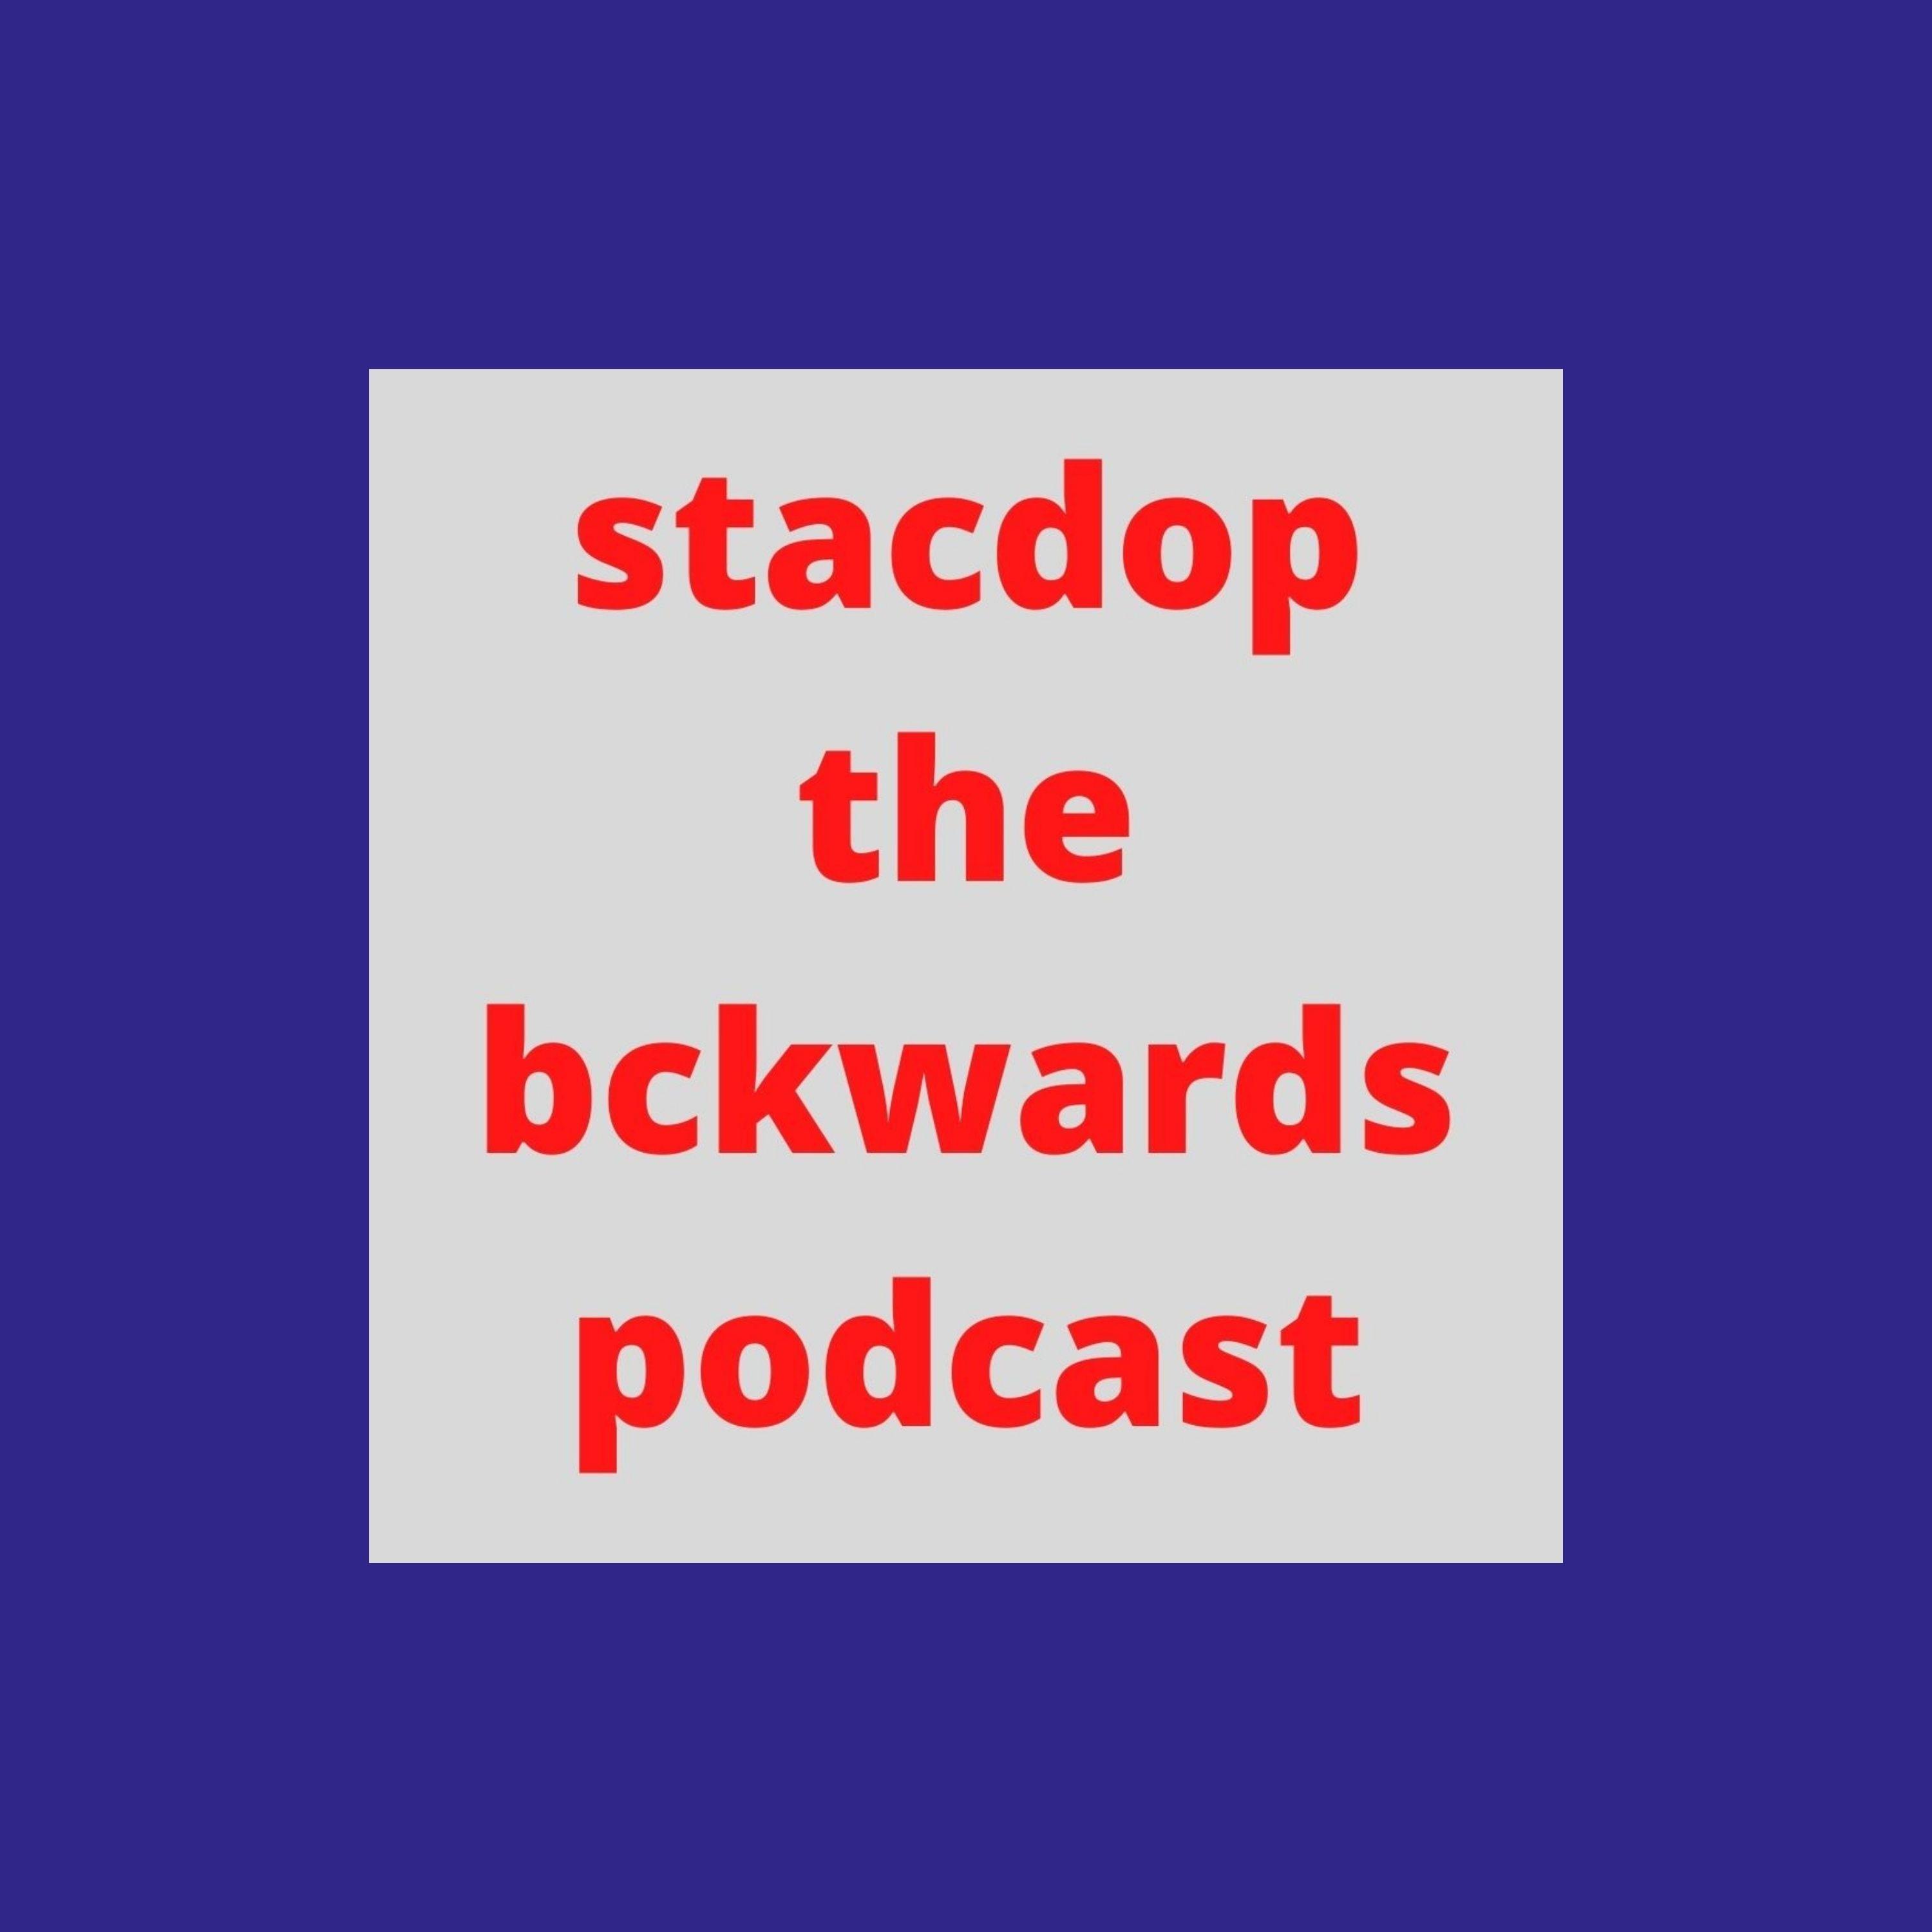 stacdop the backwards podcast